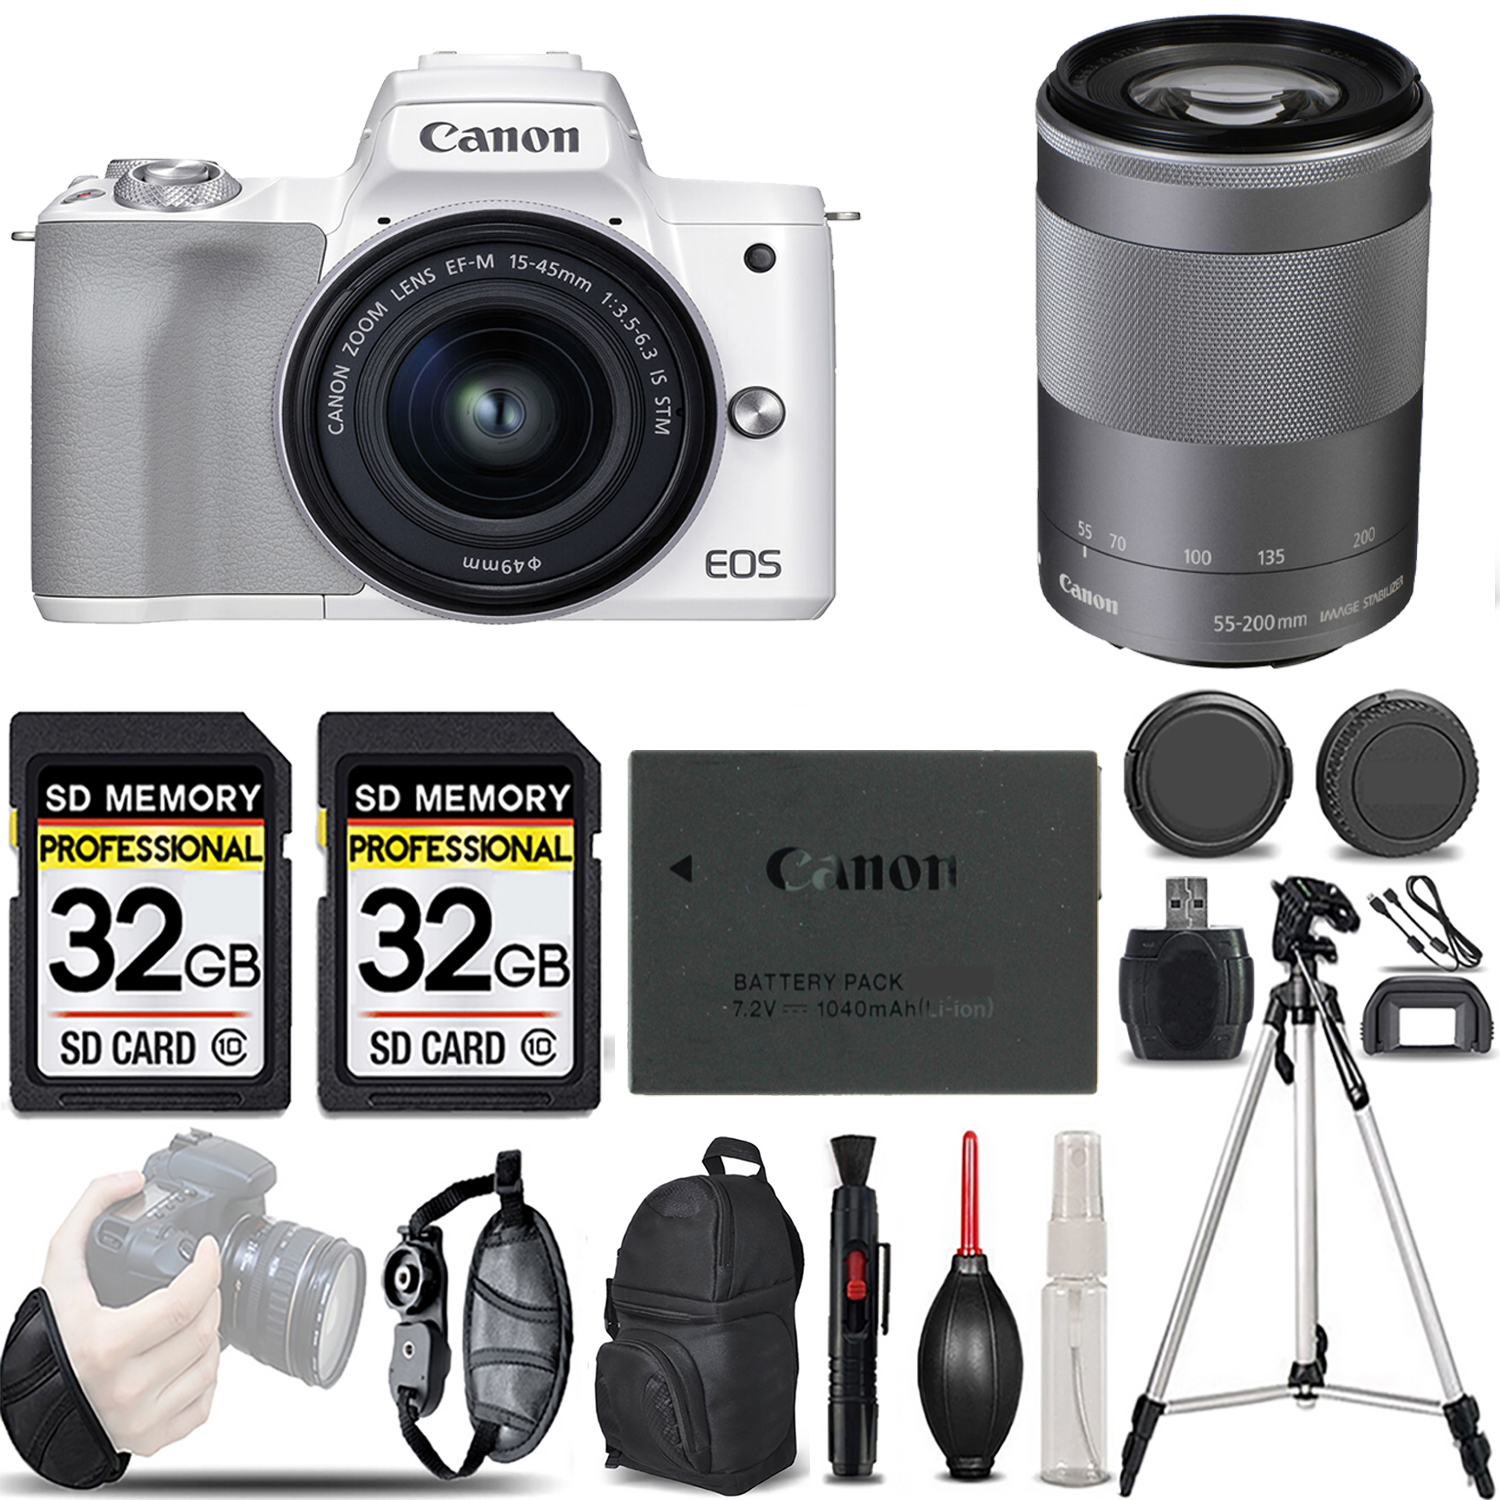 M50 II + 15-45mm Lens (White) + 55-200mm IS Lens (Silver) - LOADED KIT *FREE SHIPPING*